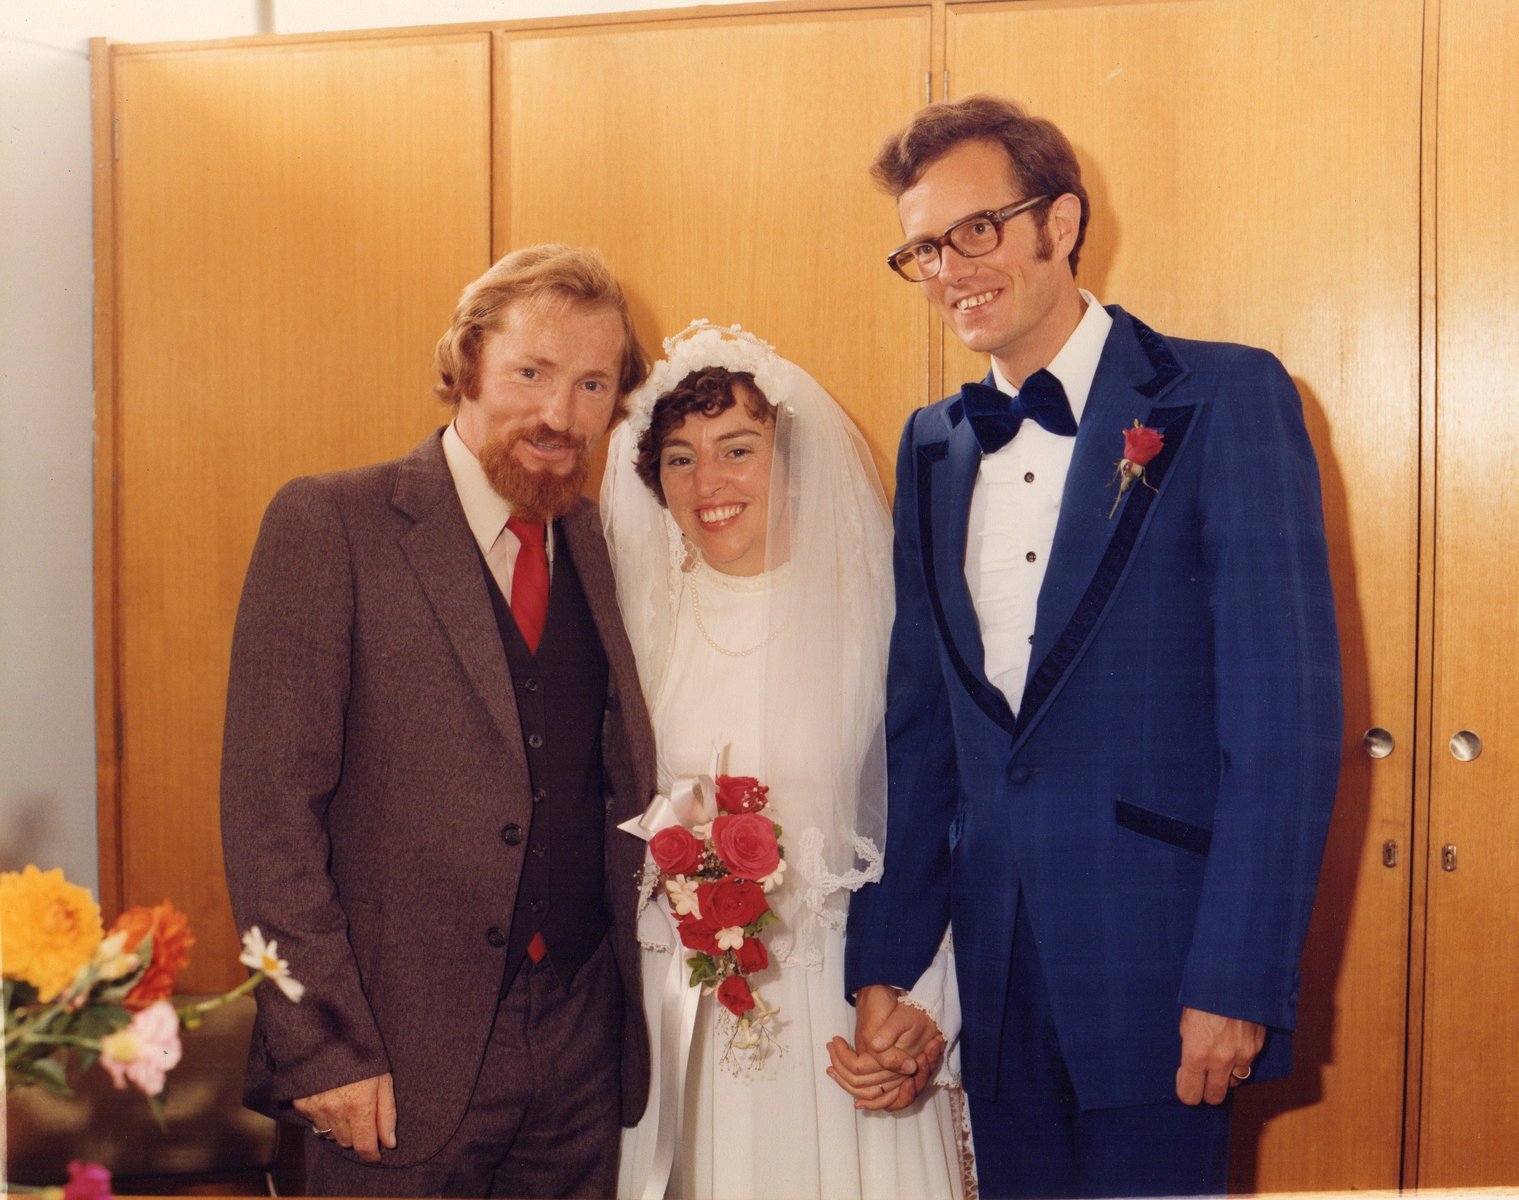 14 Ronald & Stanlin Laughlin with friend on their wedding day.jp